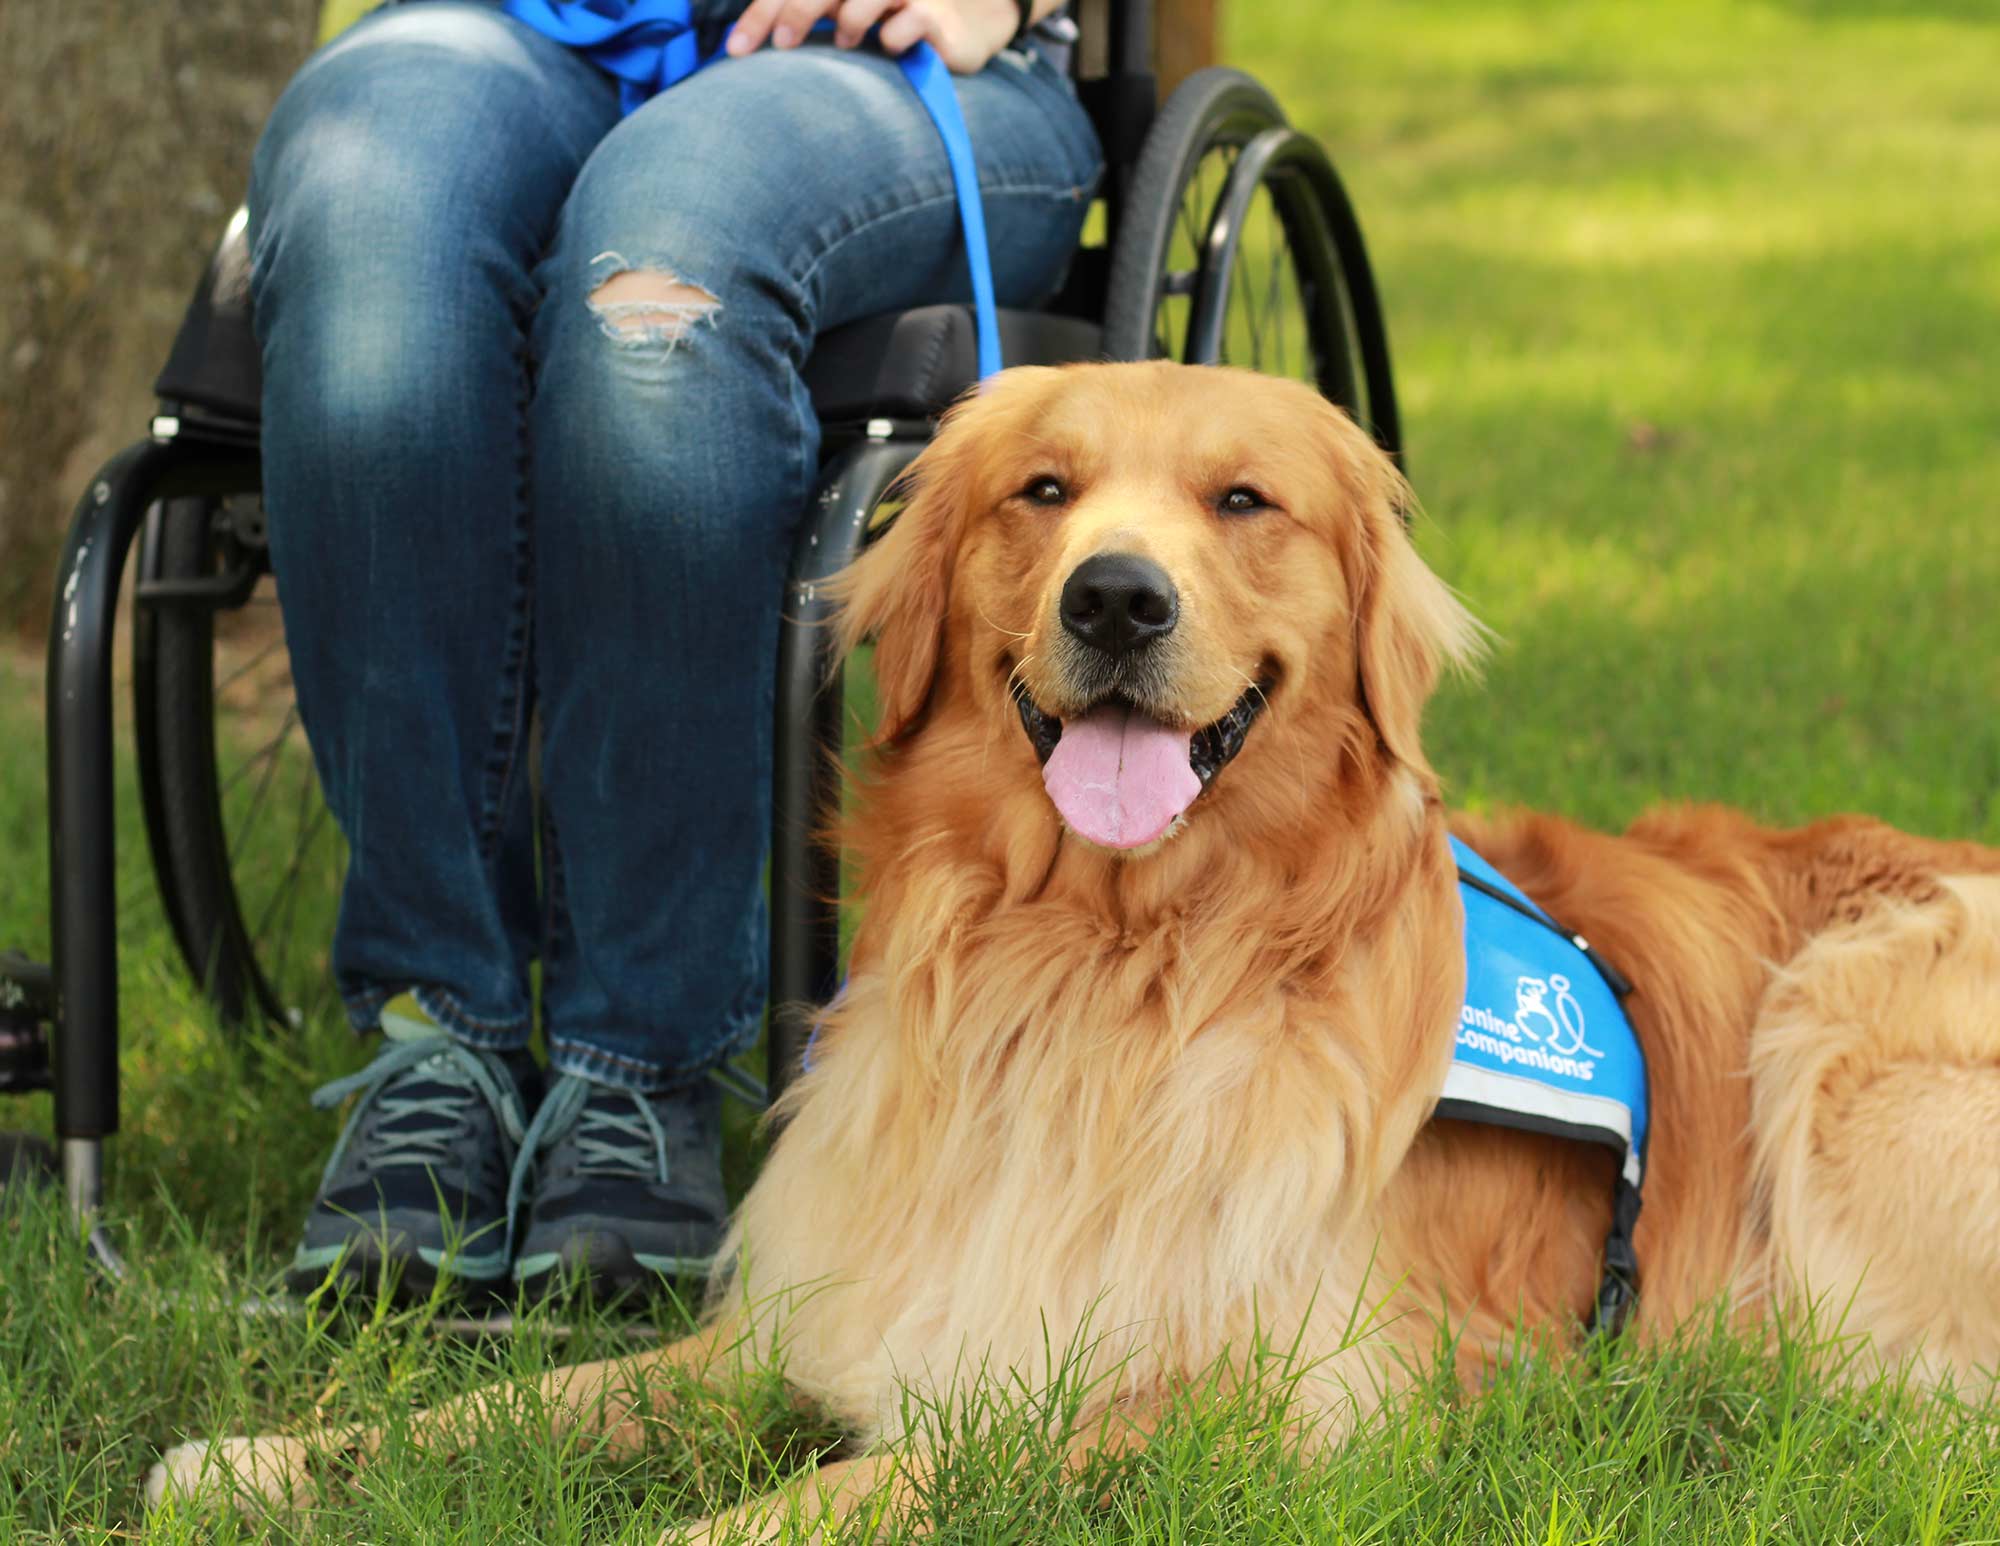 A Golden Retriever in a blue service vest lays next to a person using a wheelchair